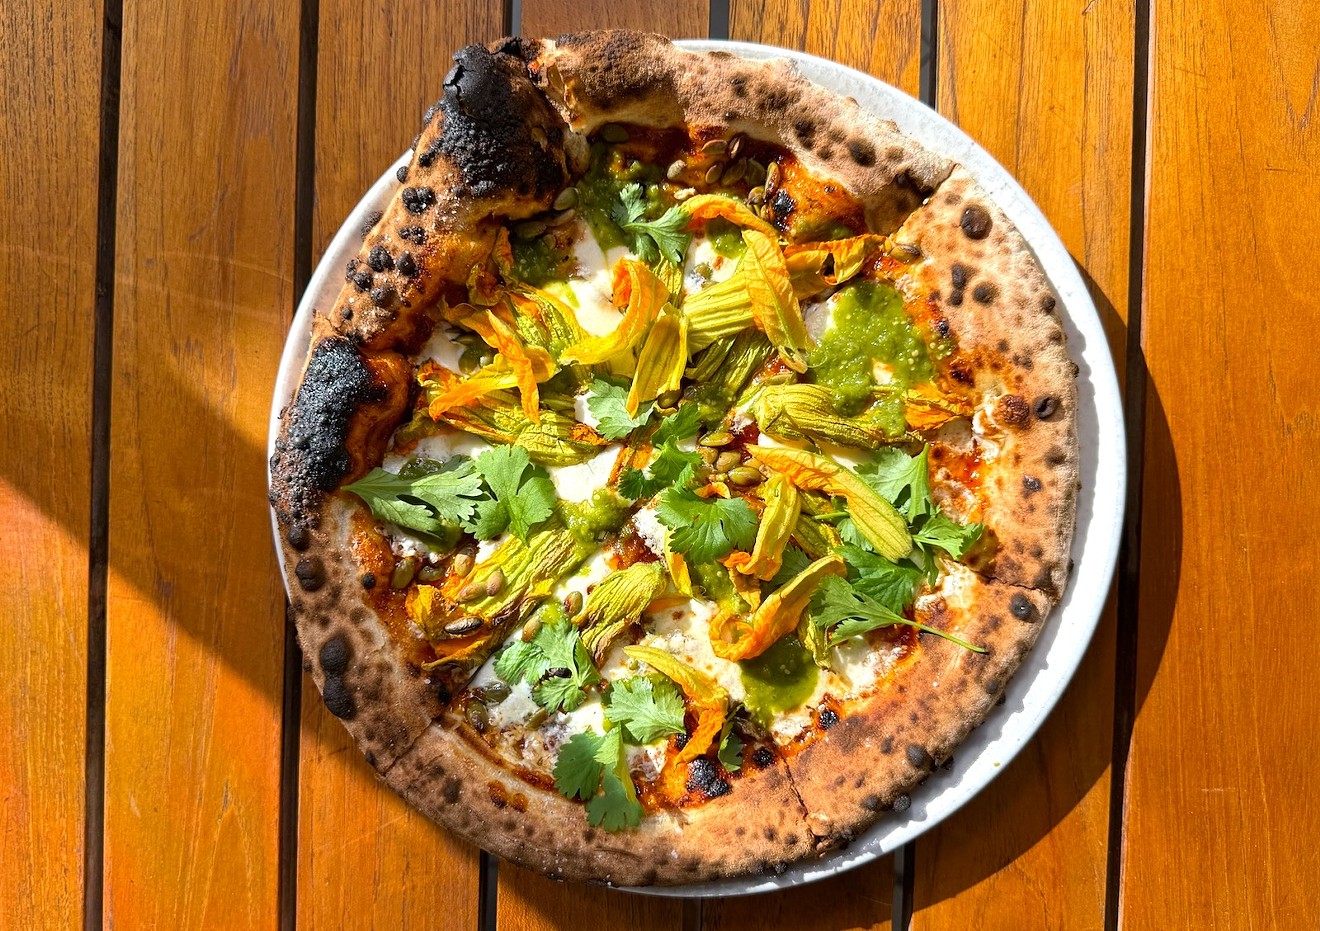 The Oaxacan pizza will be offered as part of the Masienda dinner topped with squash blossoms, quesillo, salsa, and pumpkin seeds.